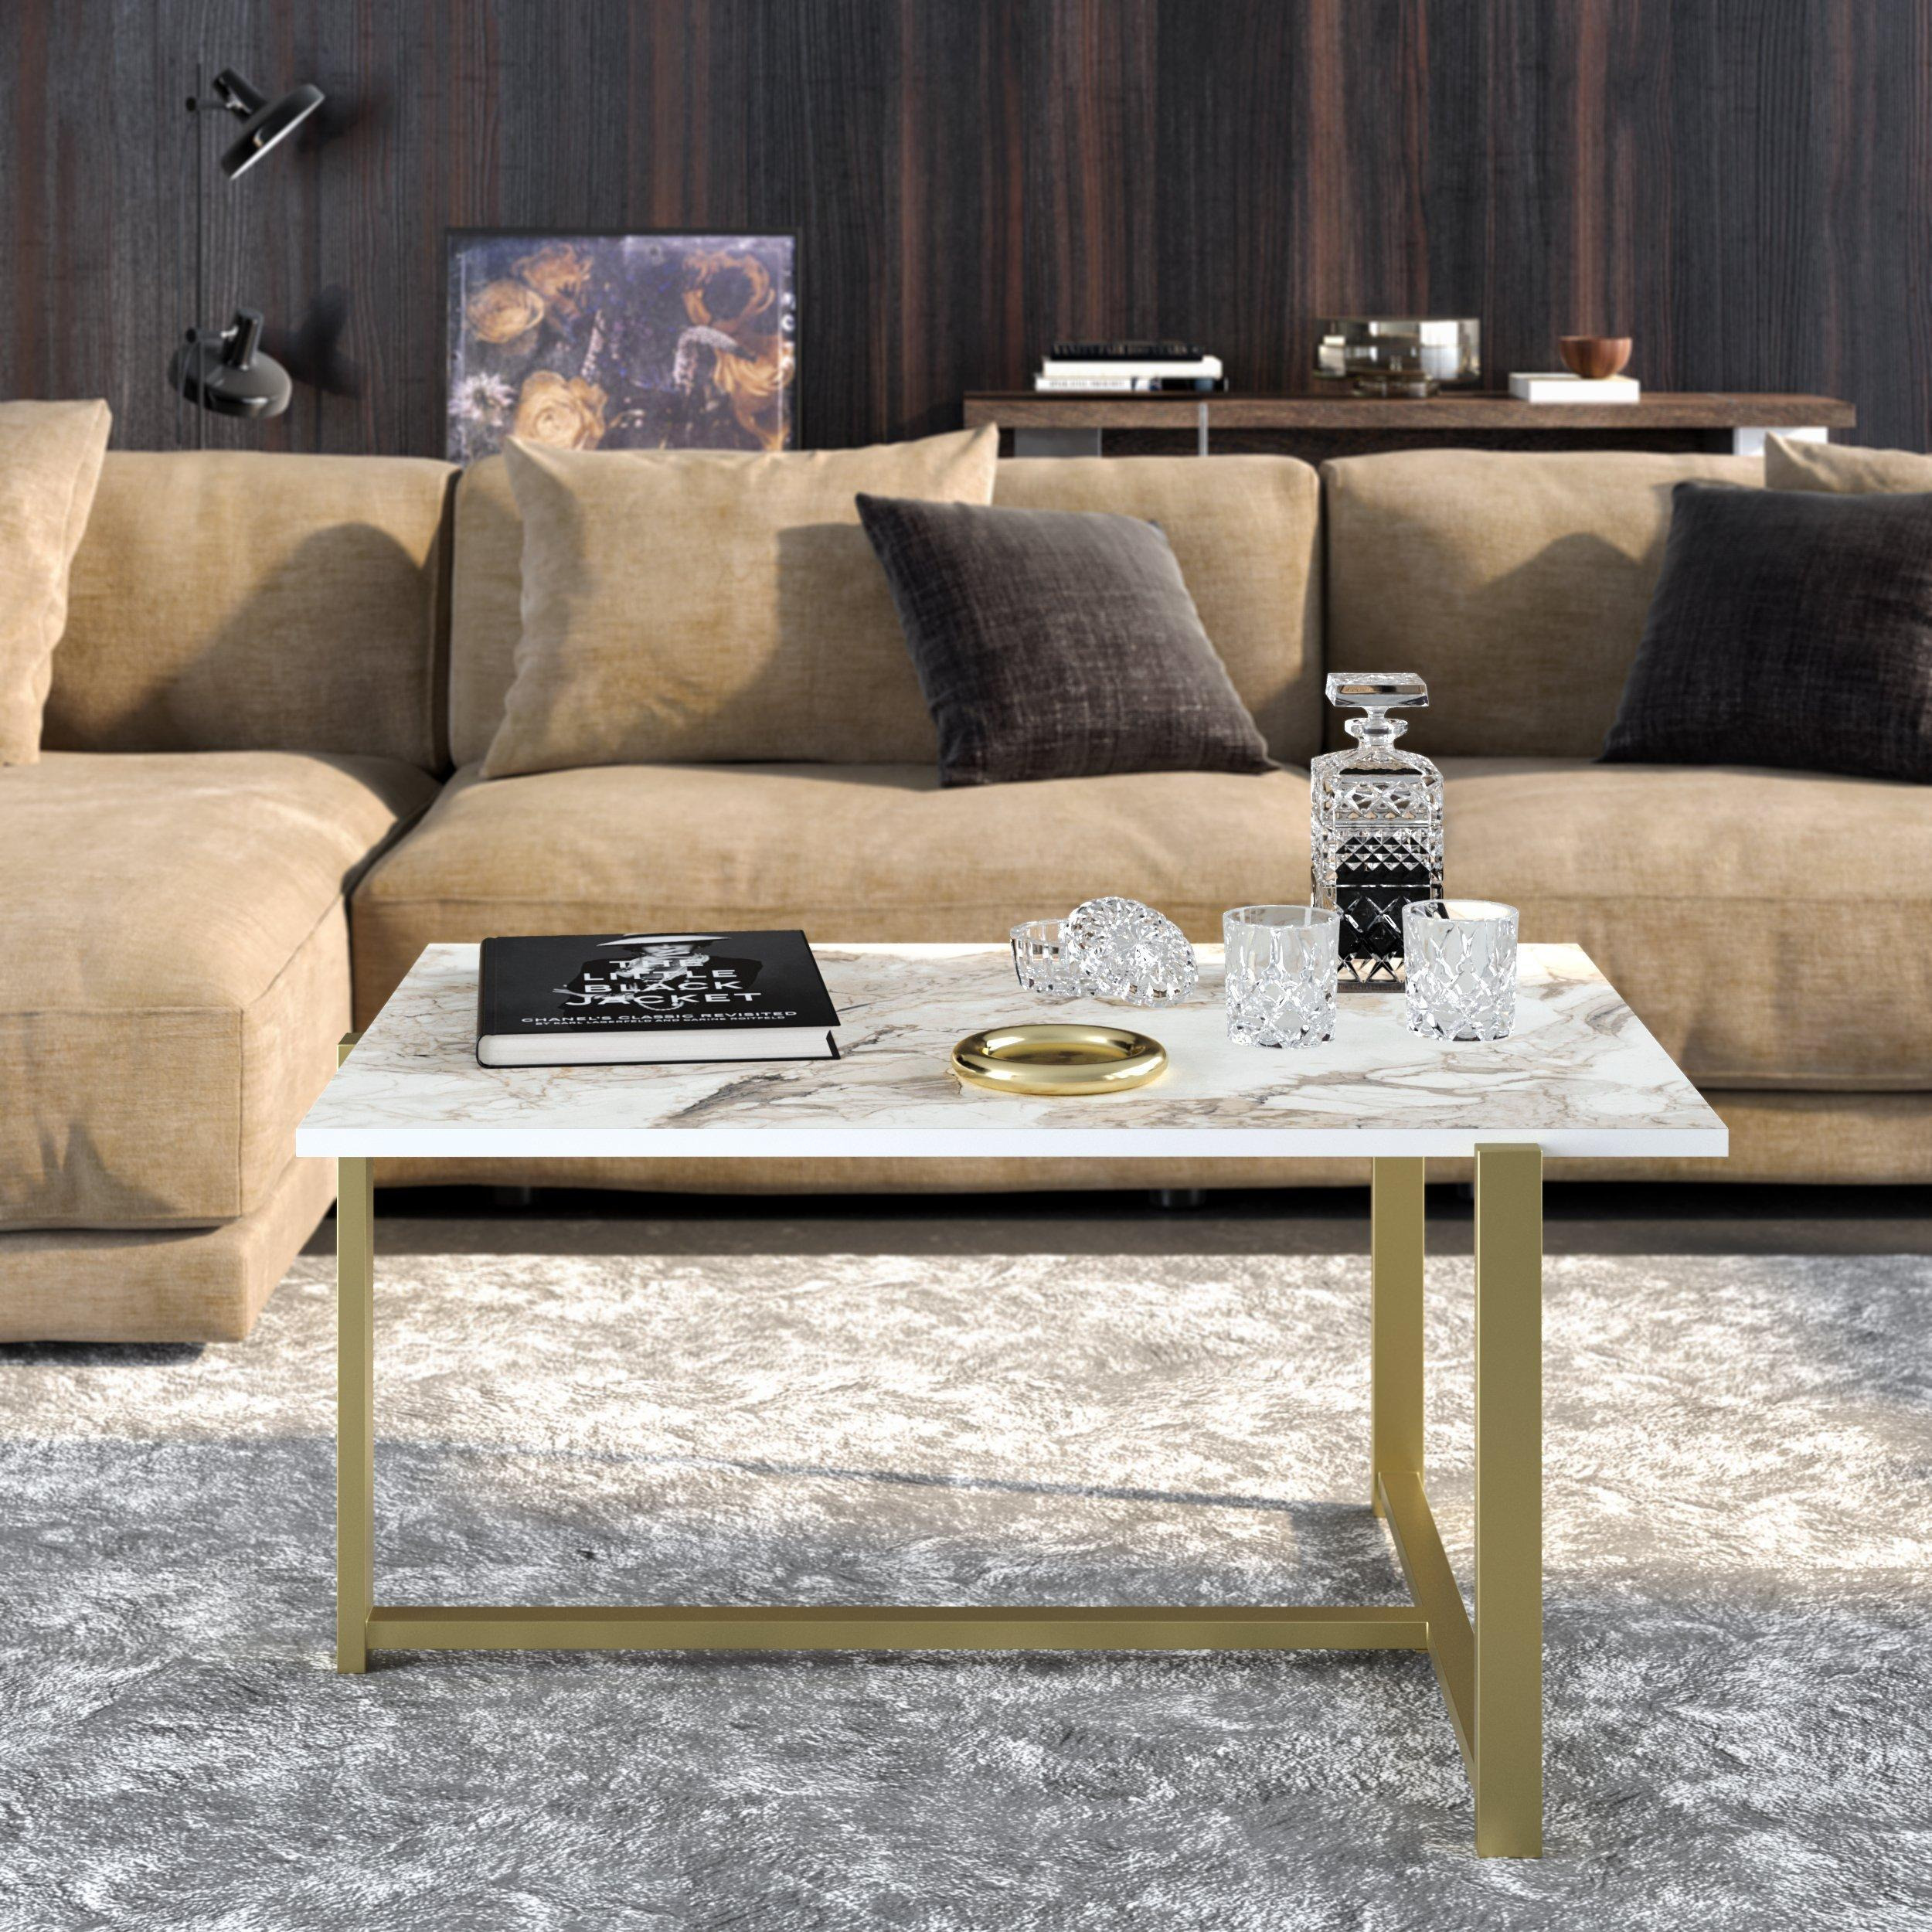 Merideths Marble Effect Metal Coffee Table for Living Room and Office - image 1